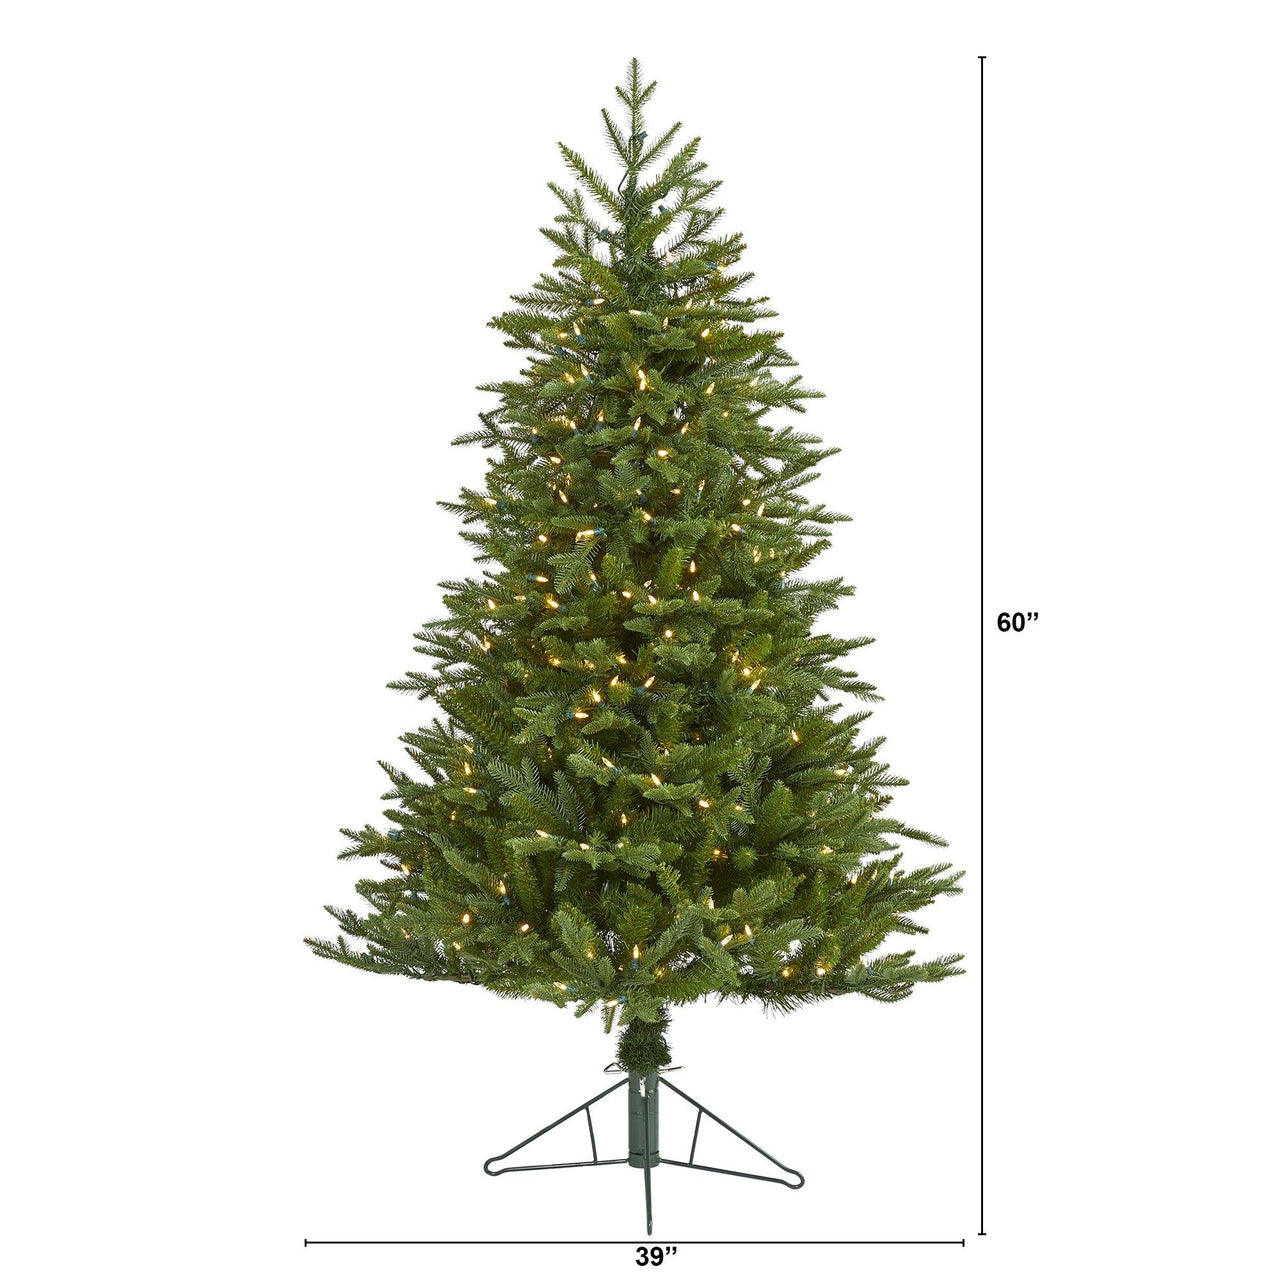 5' Cambridge Fir Artificial Christmas Tree with 300 Clear Warm (Multifunction) LED Lights with Instant Connect Technology and 570 Bendable Branches - The Fox Decor